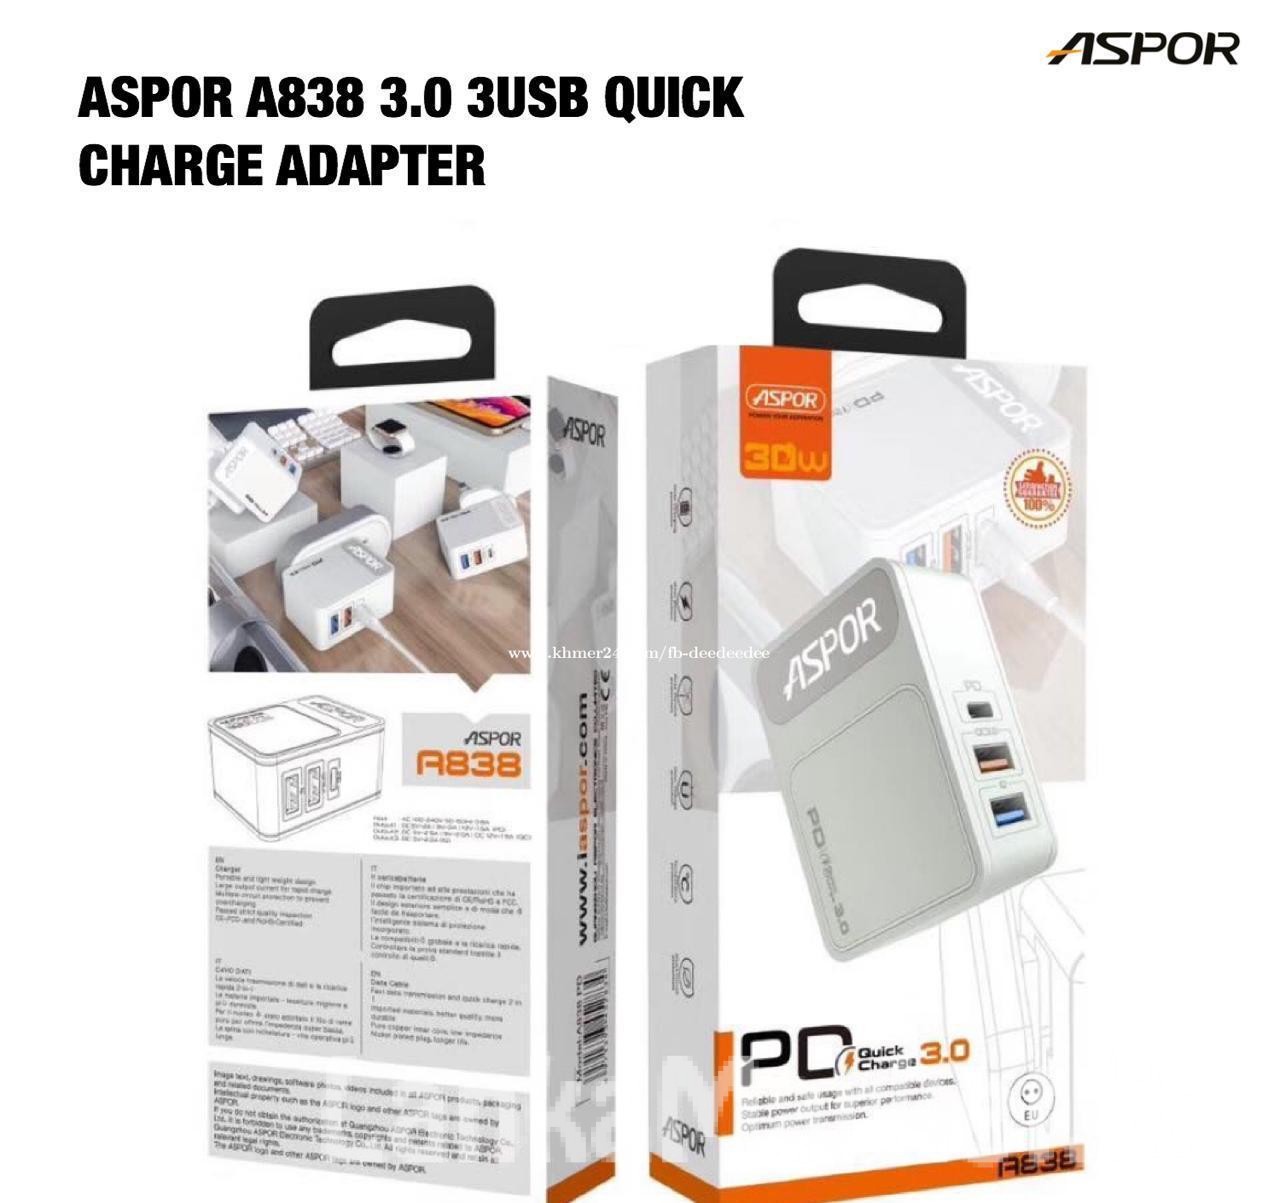 USB Quick Charge Adapter / USB Quick Charging  Adapter / Aspor A838 3.0 USB Quick Charge Adapter – 3 in 1